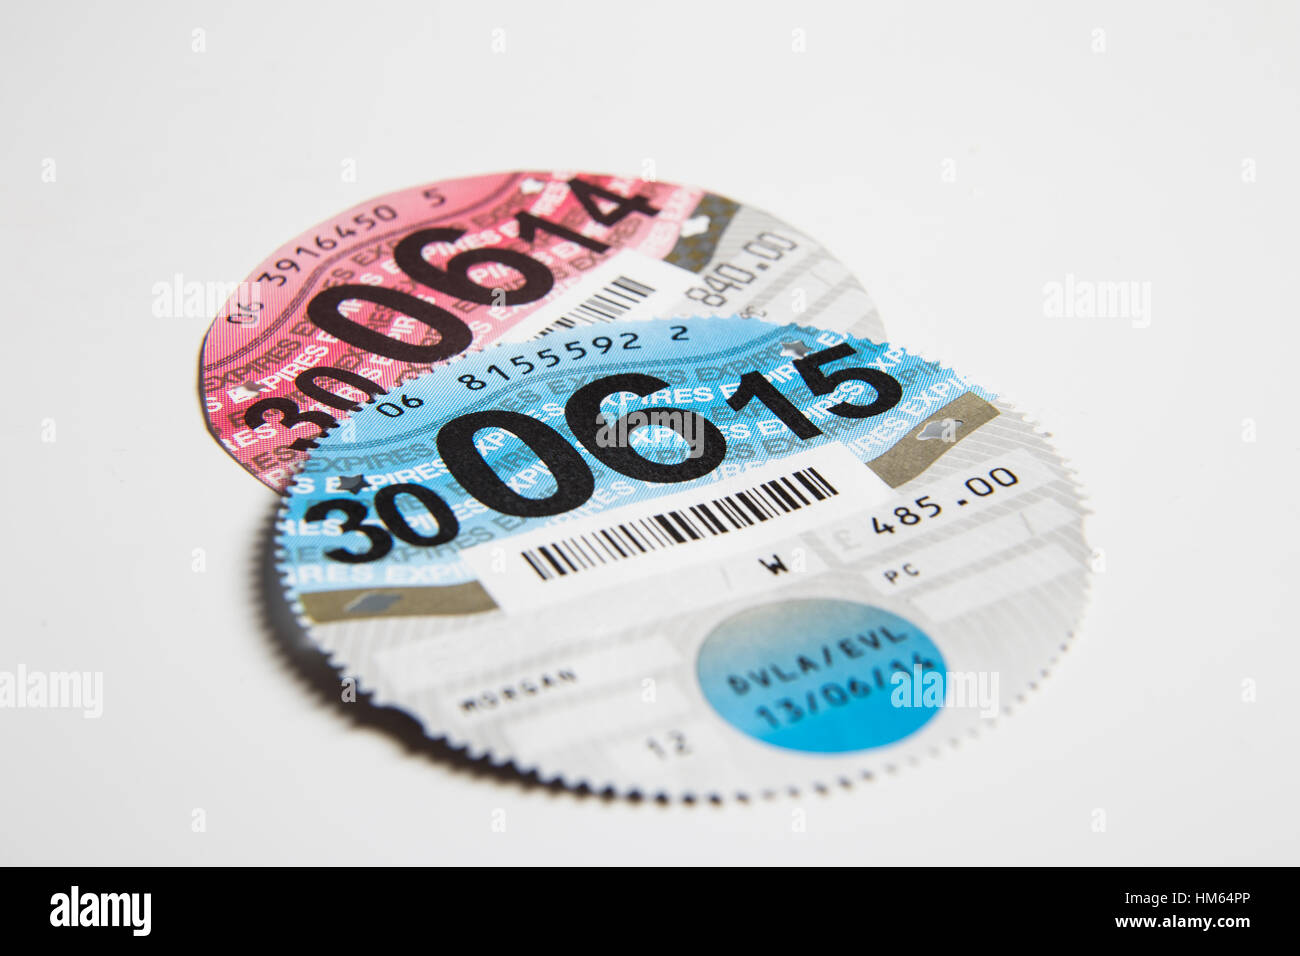 Old round British Car Tax Discs that used to go in the windscreen. Stock Photo